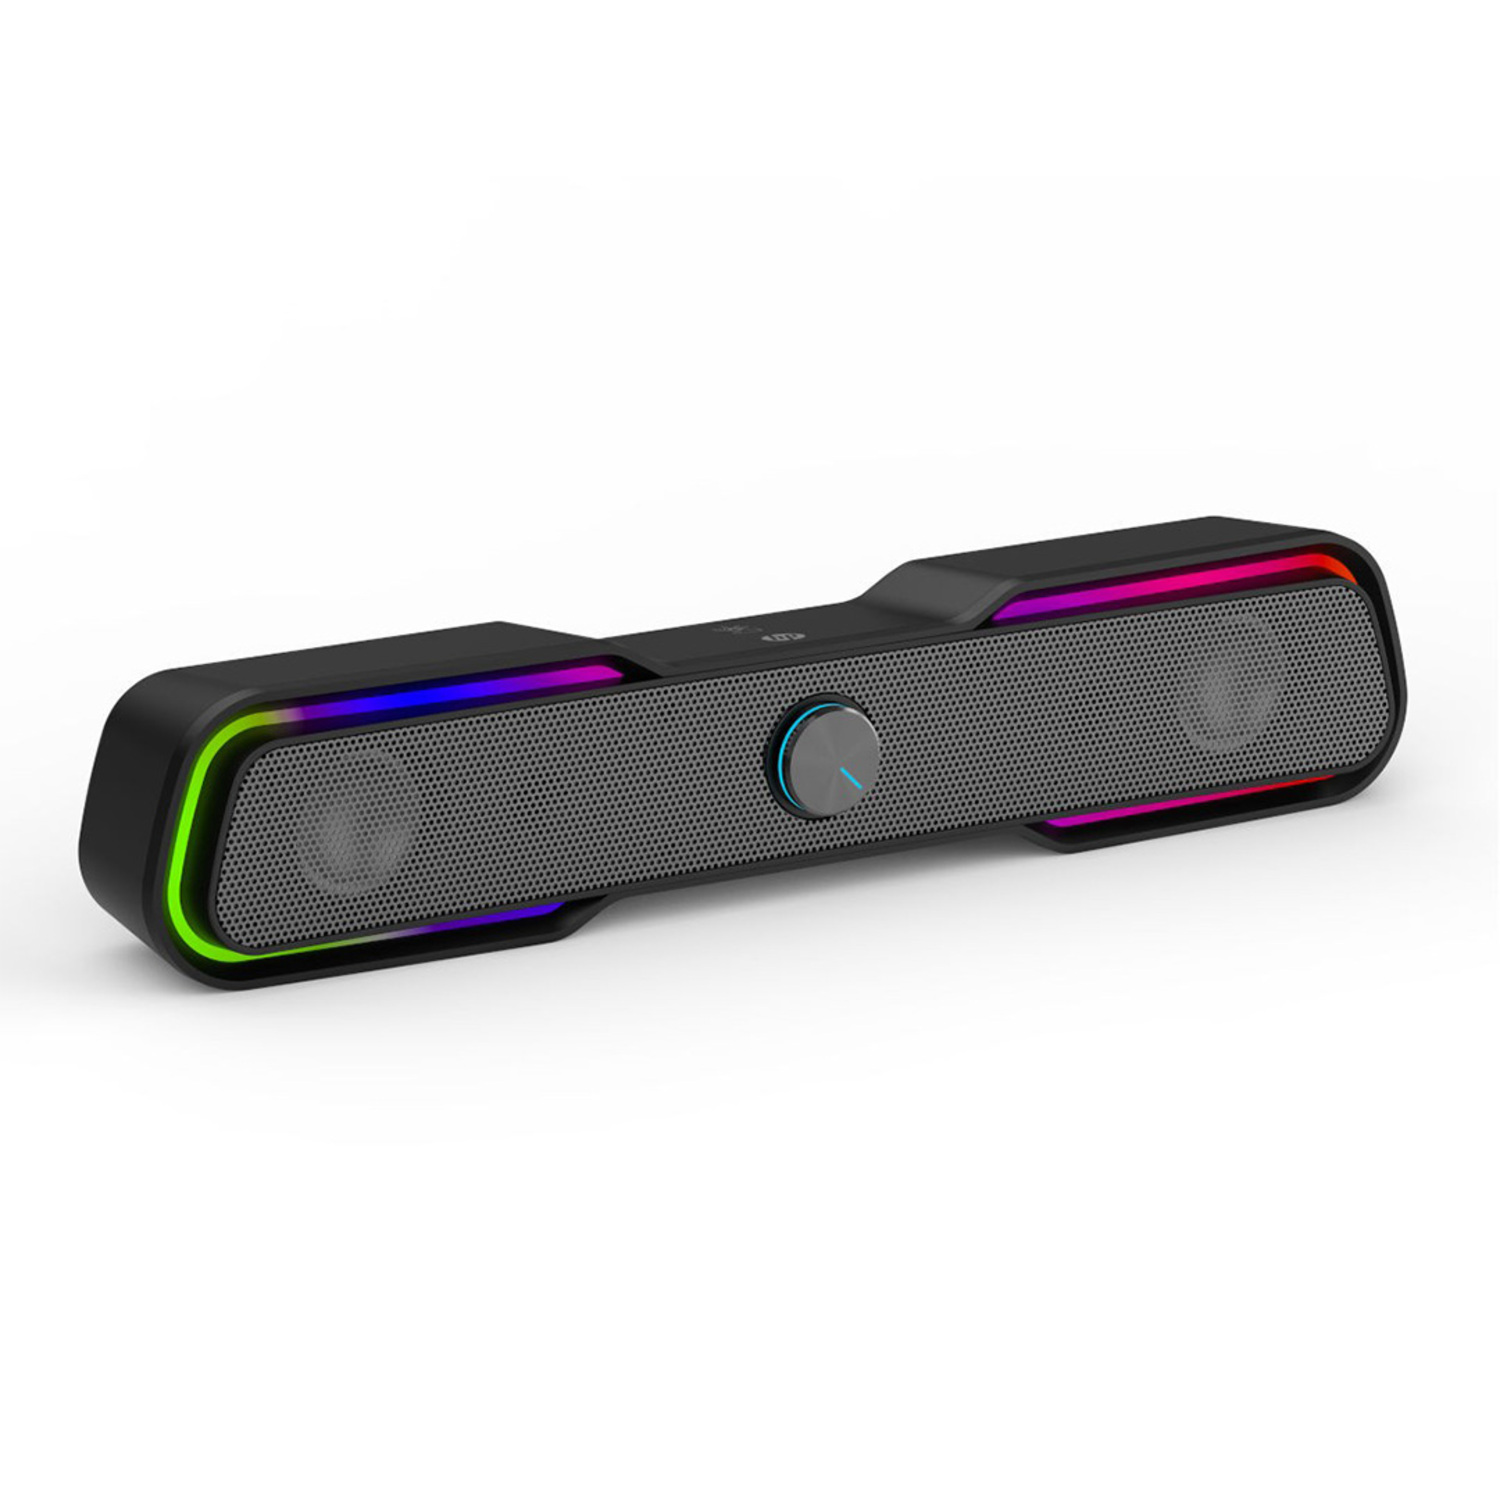 USB Sound bar Multimedia Speakers With Stereo Sound RGB Backlight